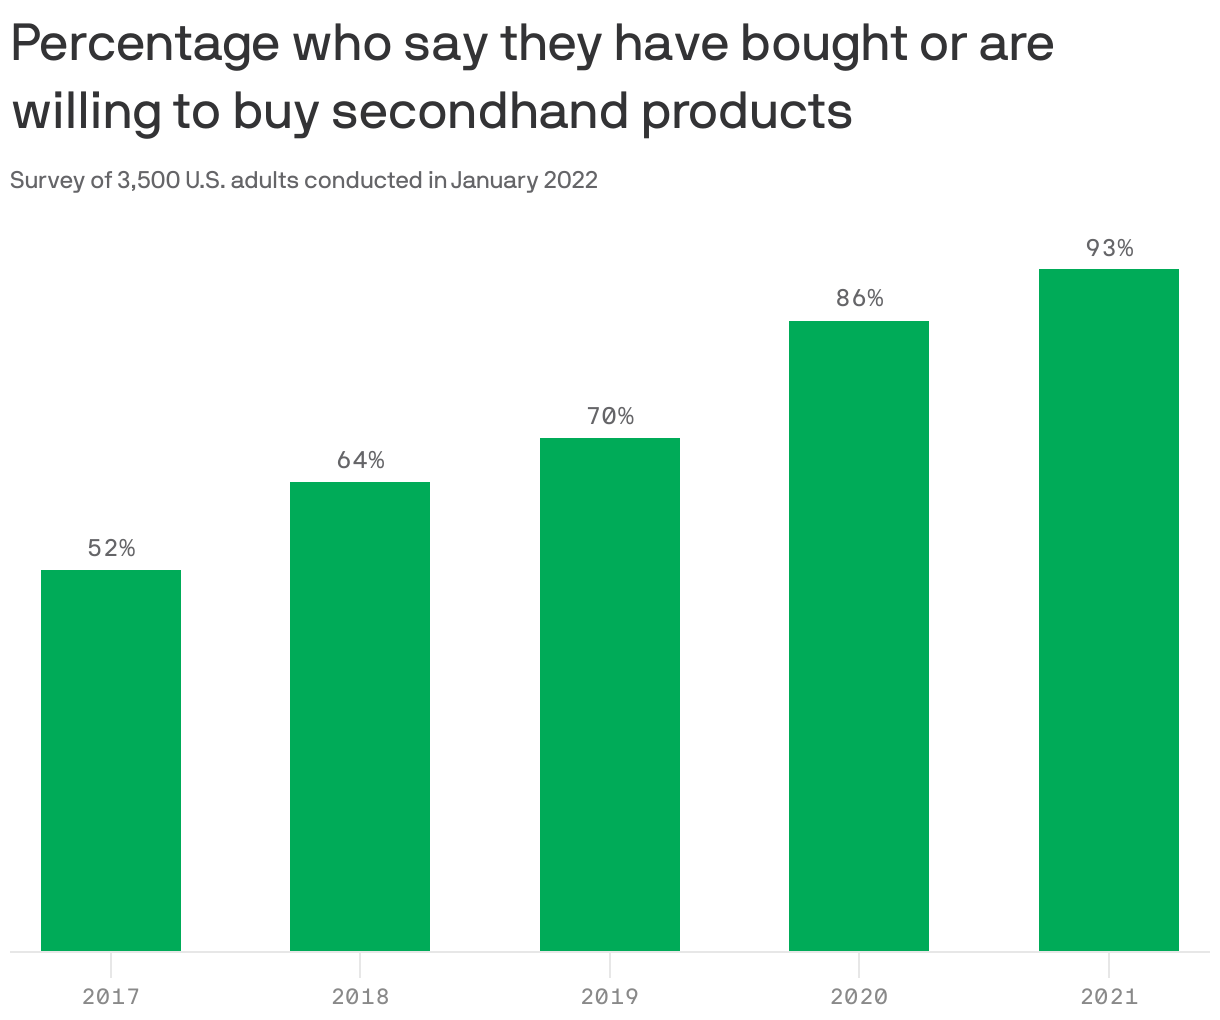 Percentage who say they have bought or are willing to buy secondhand products